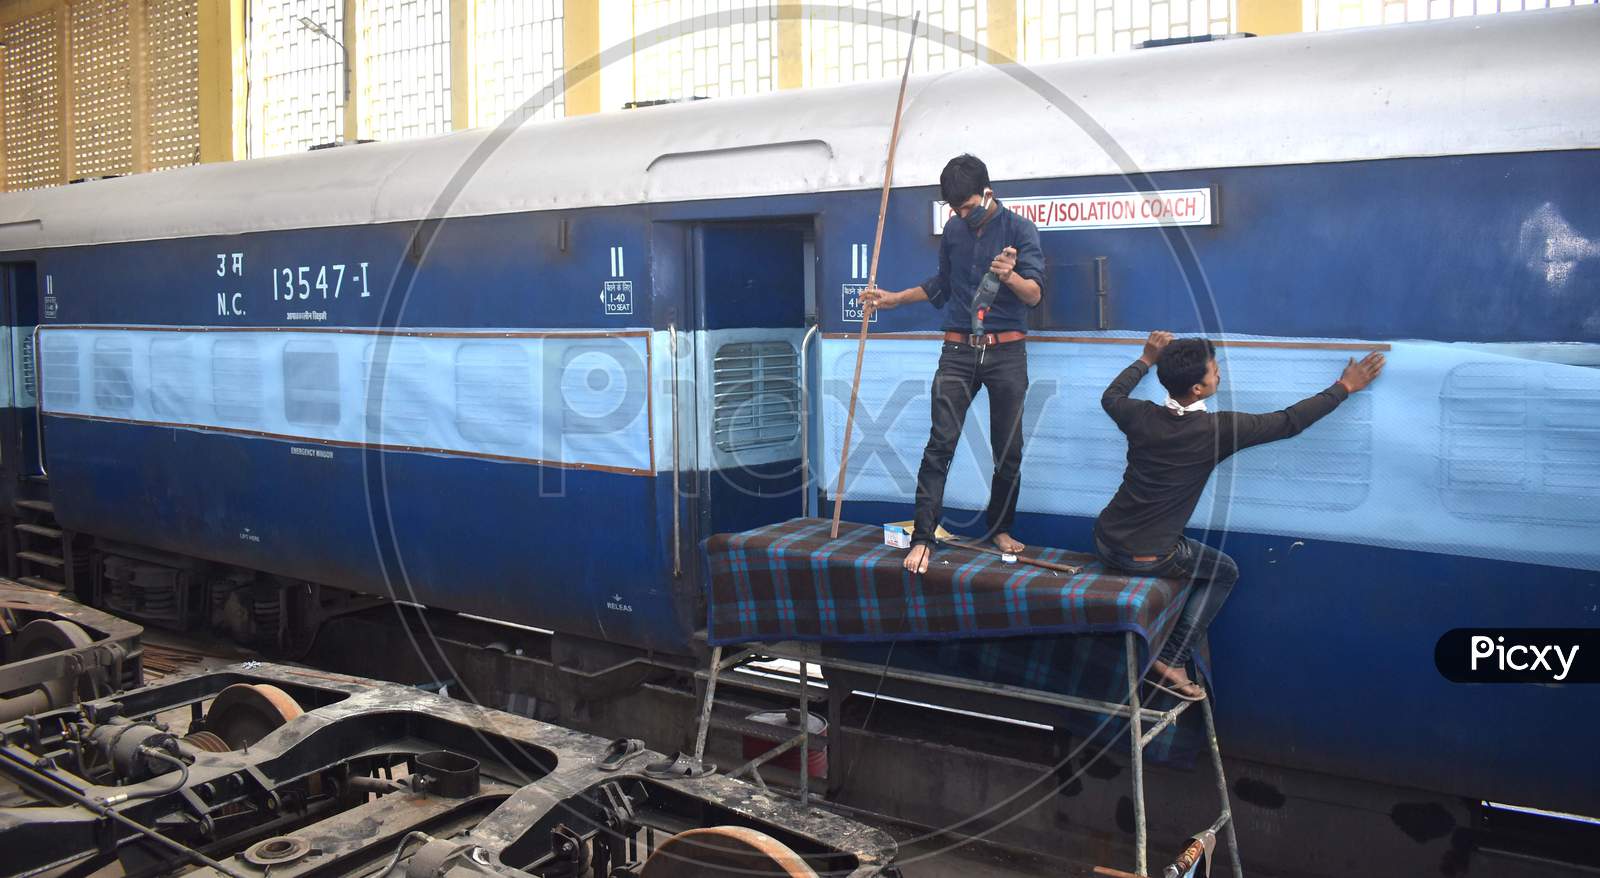 Railway Workers Getting The Train Bogies Ready For Isolation Wards For Corona Virus Or Covid-19 Patients, Prayagraj